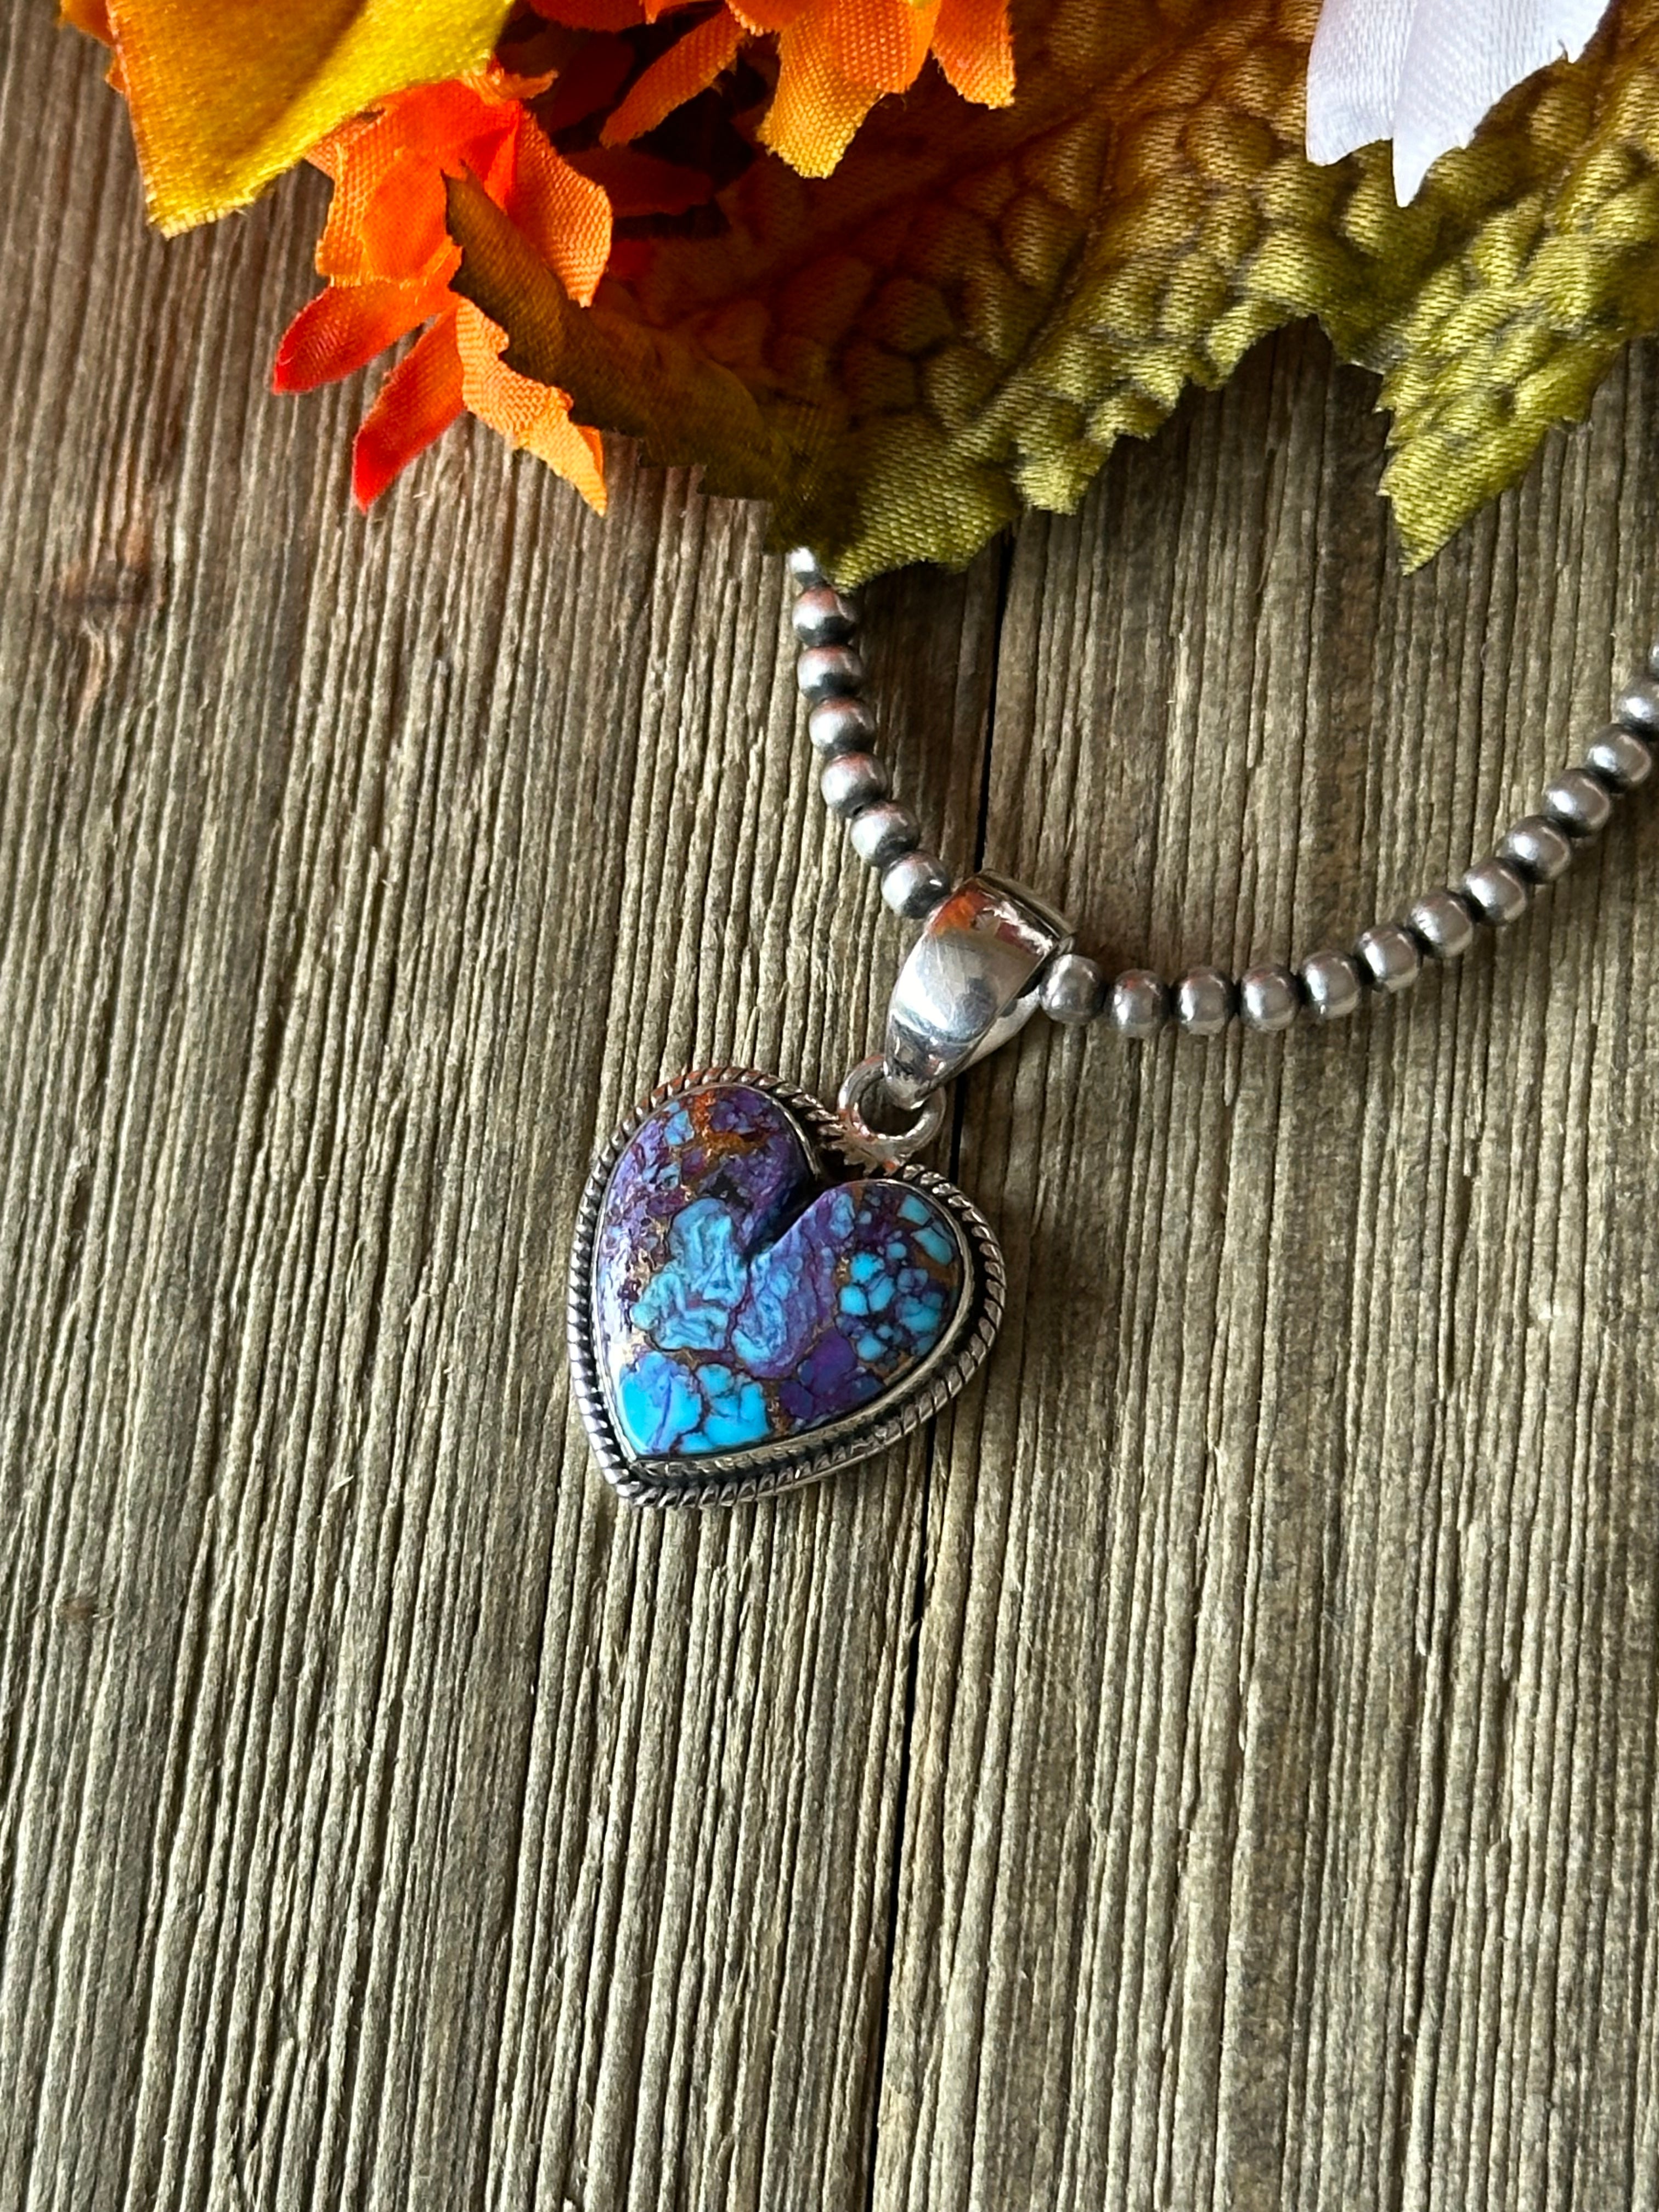 Southwest Handmade Purple Mohave Turquoise & Sterling Silver Heart Pendant